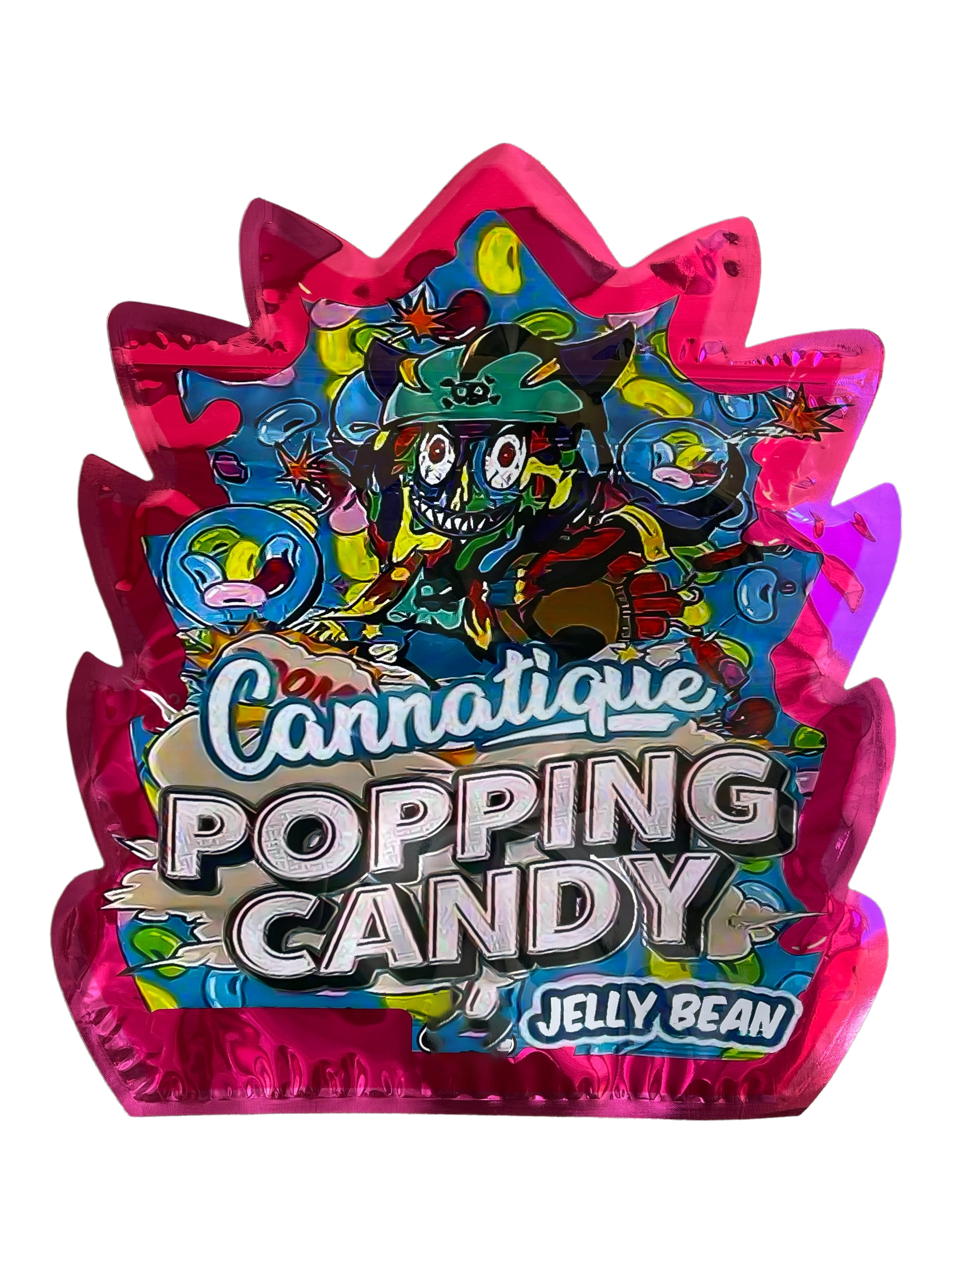 Cannatique Popping Candy Pound Bag (Large) 1LBS - 16OZ (454g)